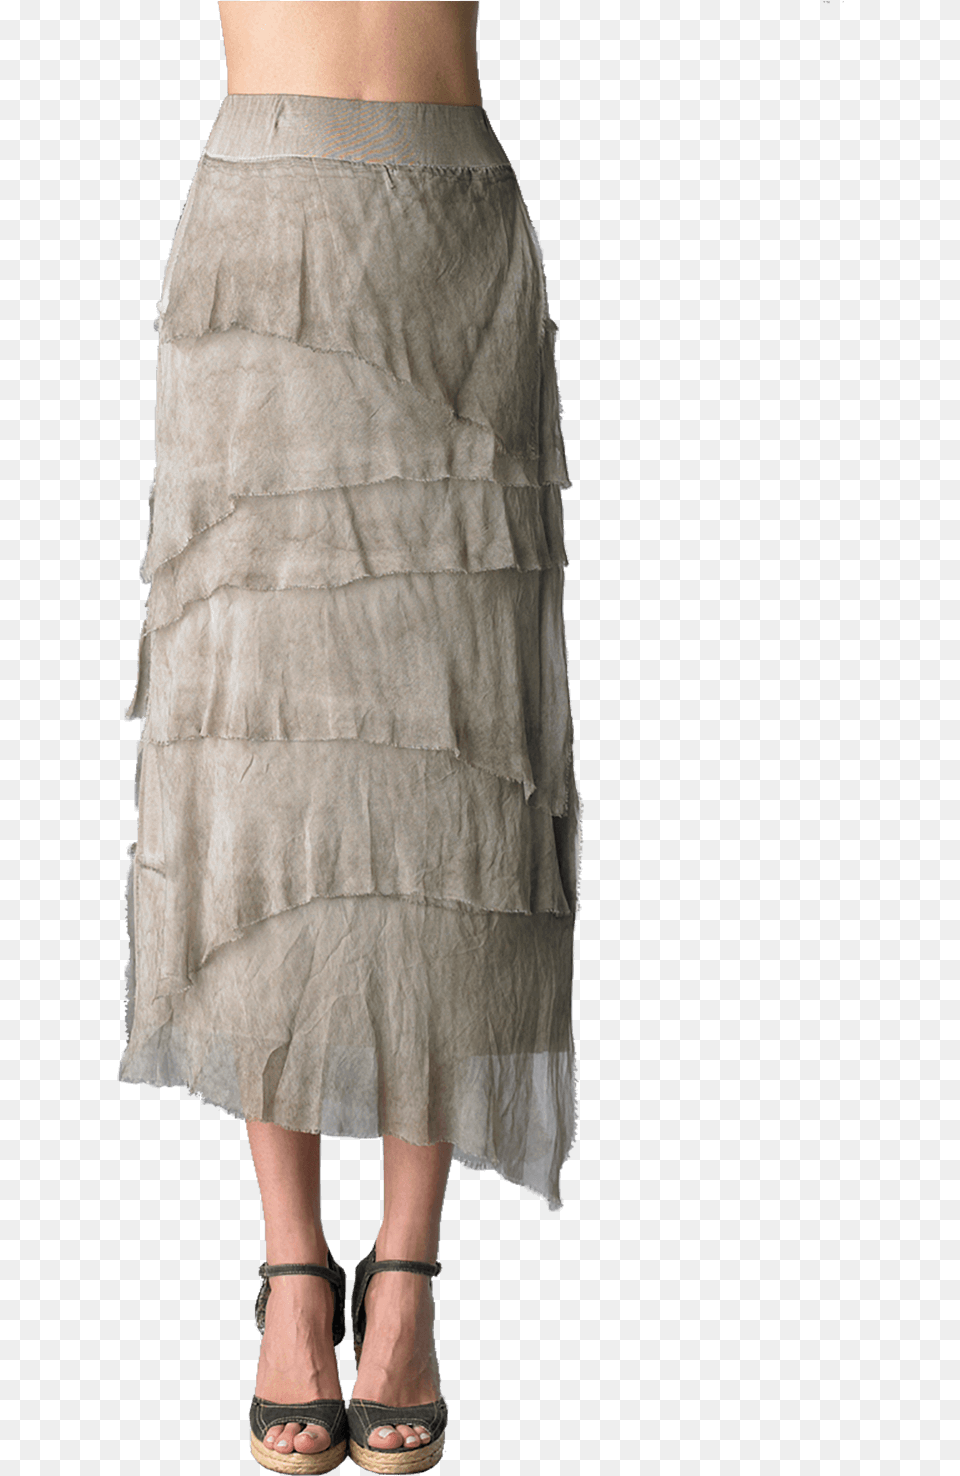 Women S Angled Tiered Skirt Overskirt, Clothing, Home Decor, Linen, Footwear Png Image